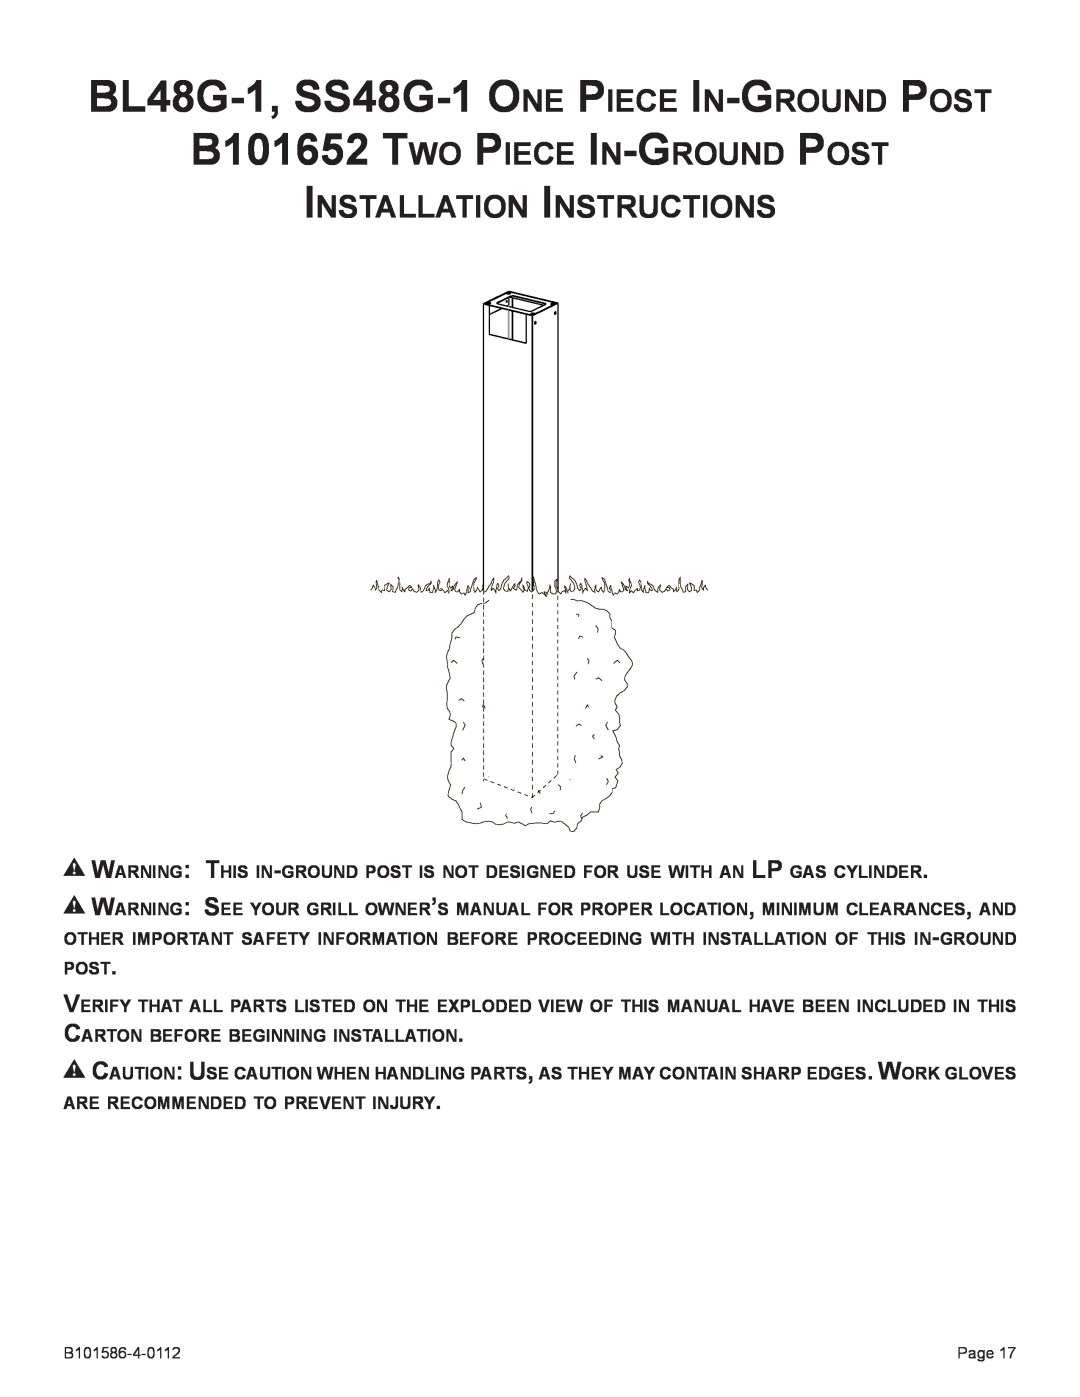 Broilmaster SS26P-1 BL48G-1, SS48G-1 One Piece In-Ground Post, B101652 Two Piece In-Ground Post Installation Instructions 